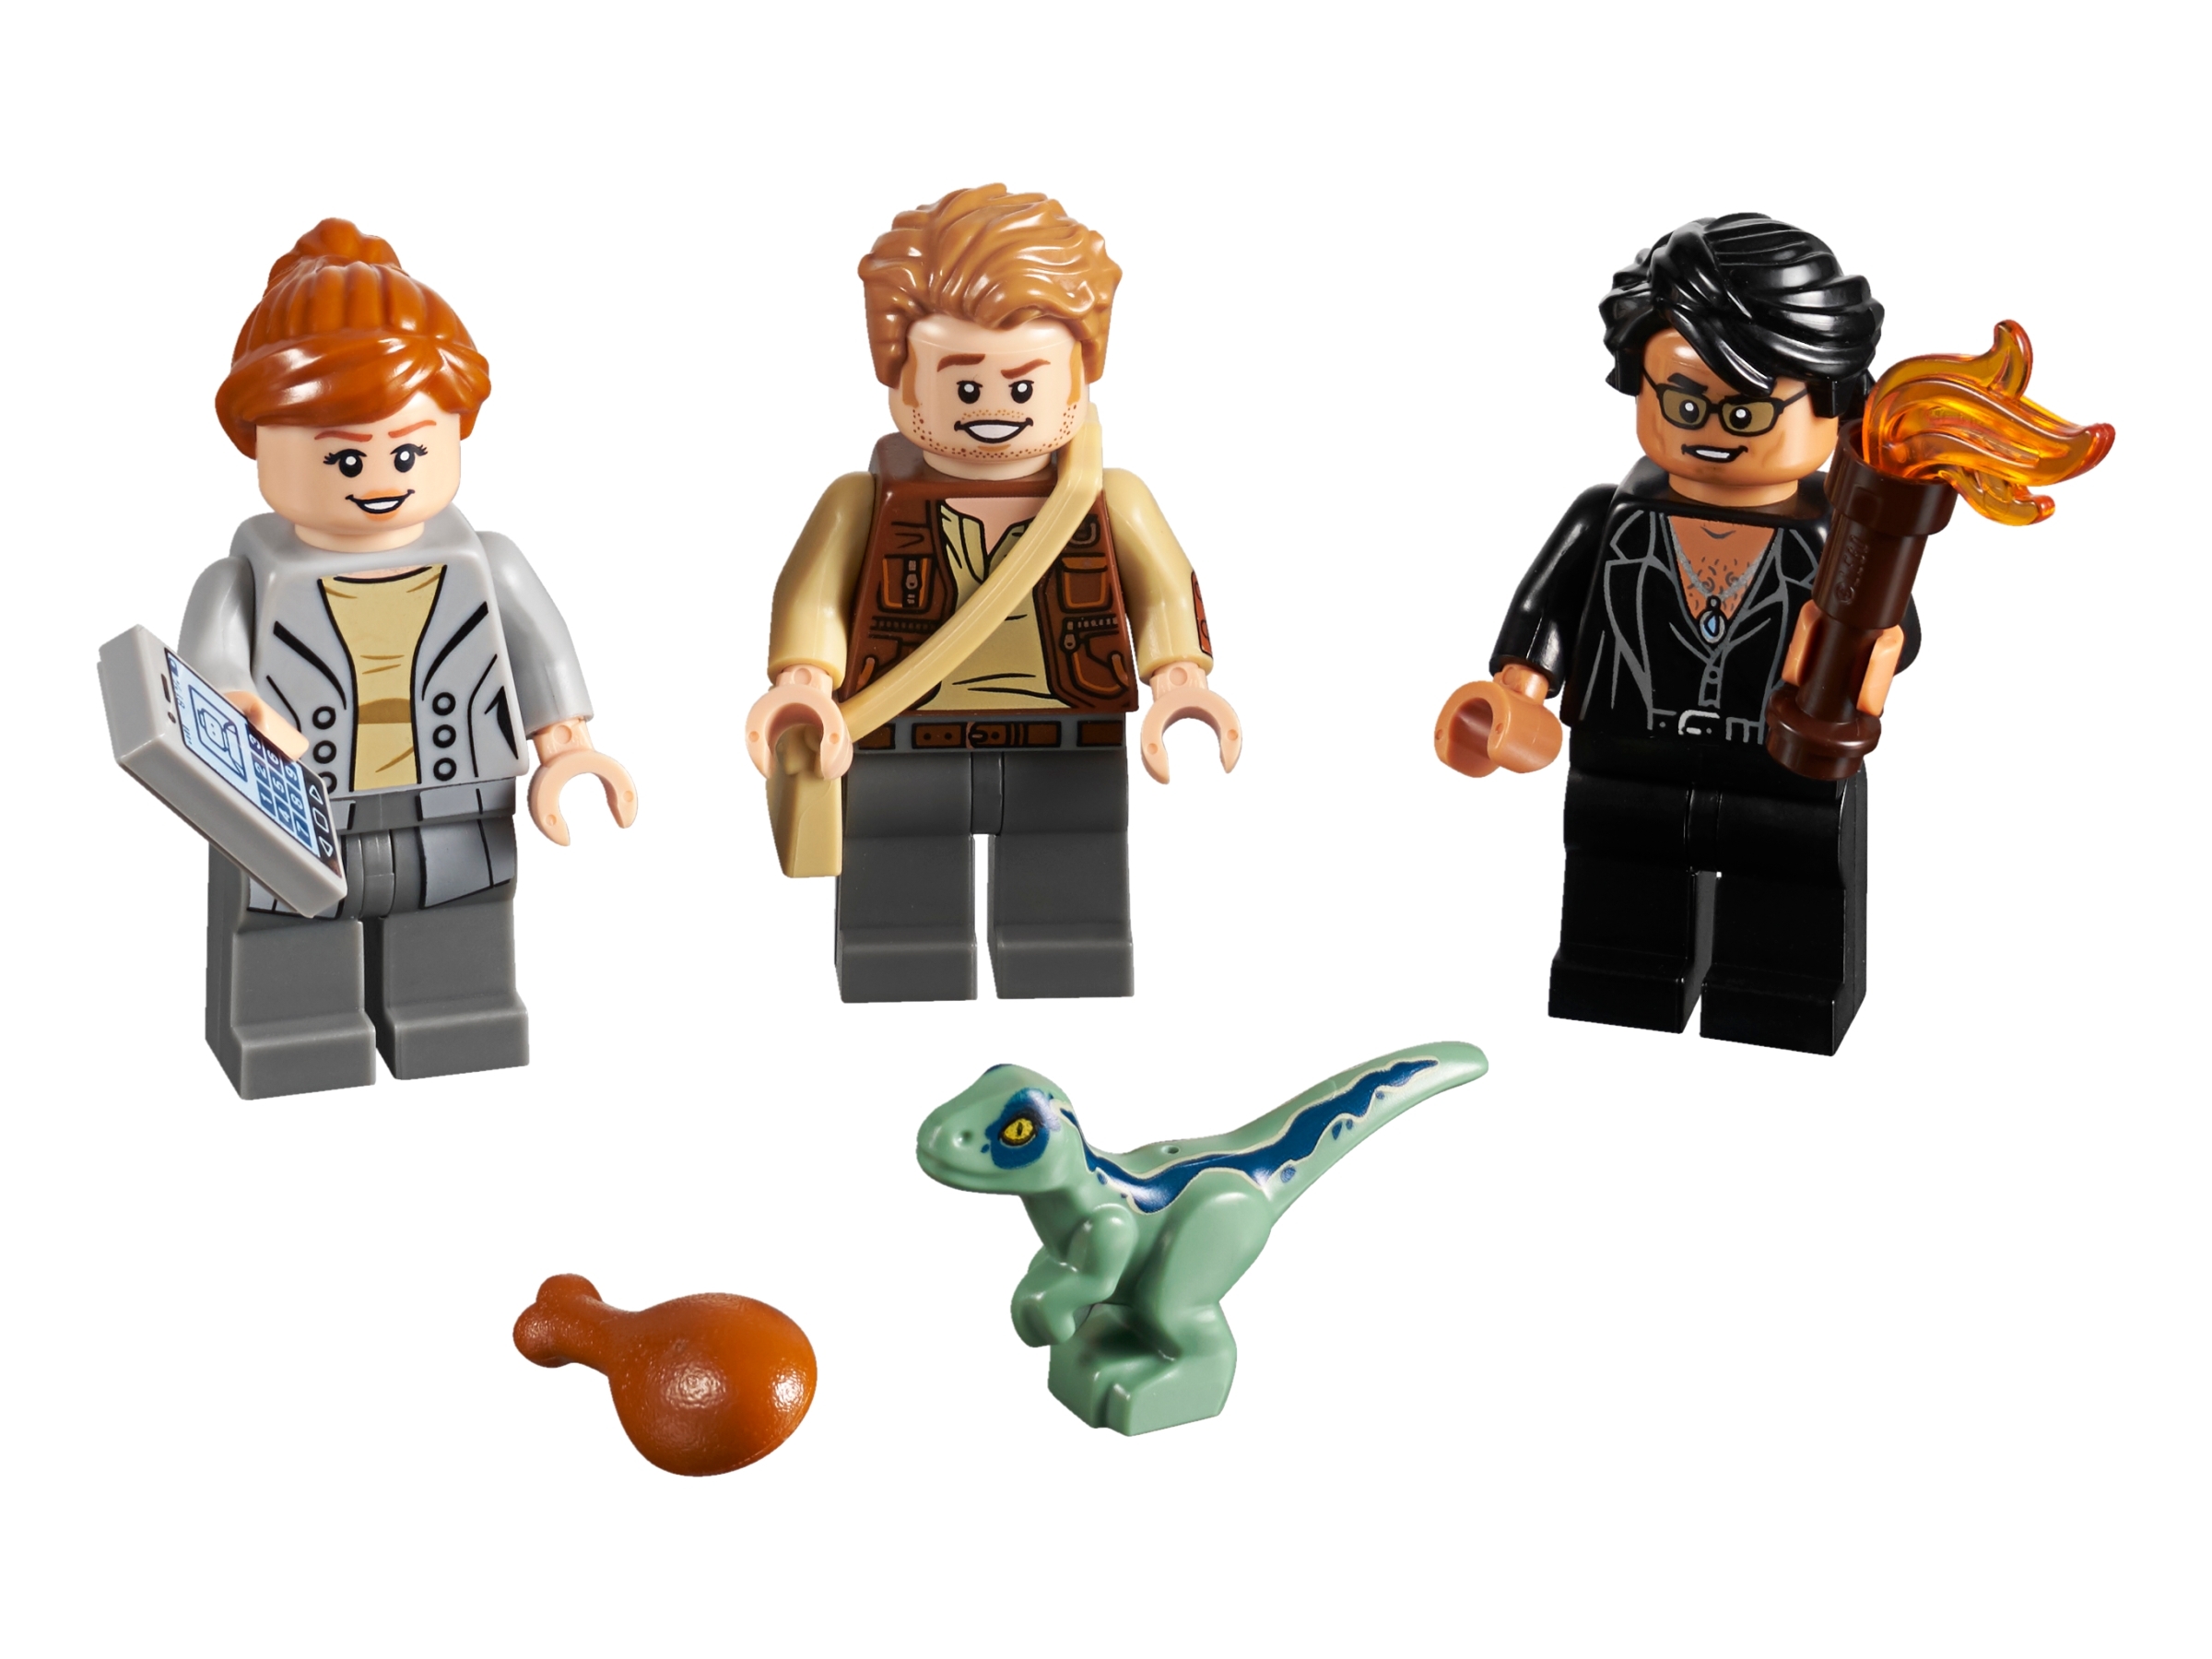 LEGO Jurassic World 5005255 Minifigures Limited Edition 18pcs for sale online